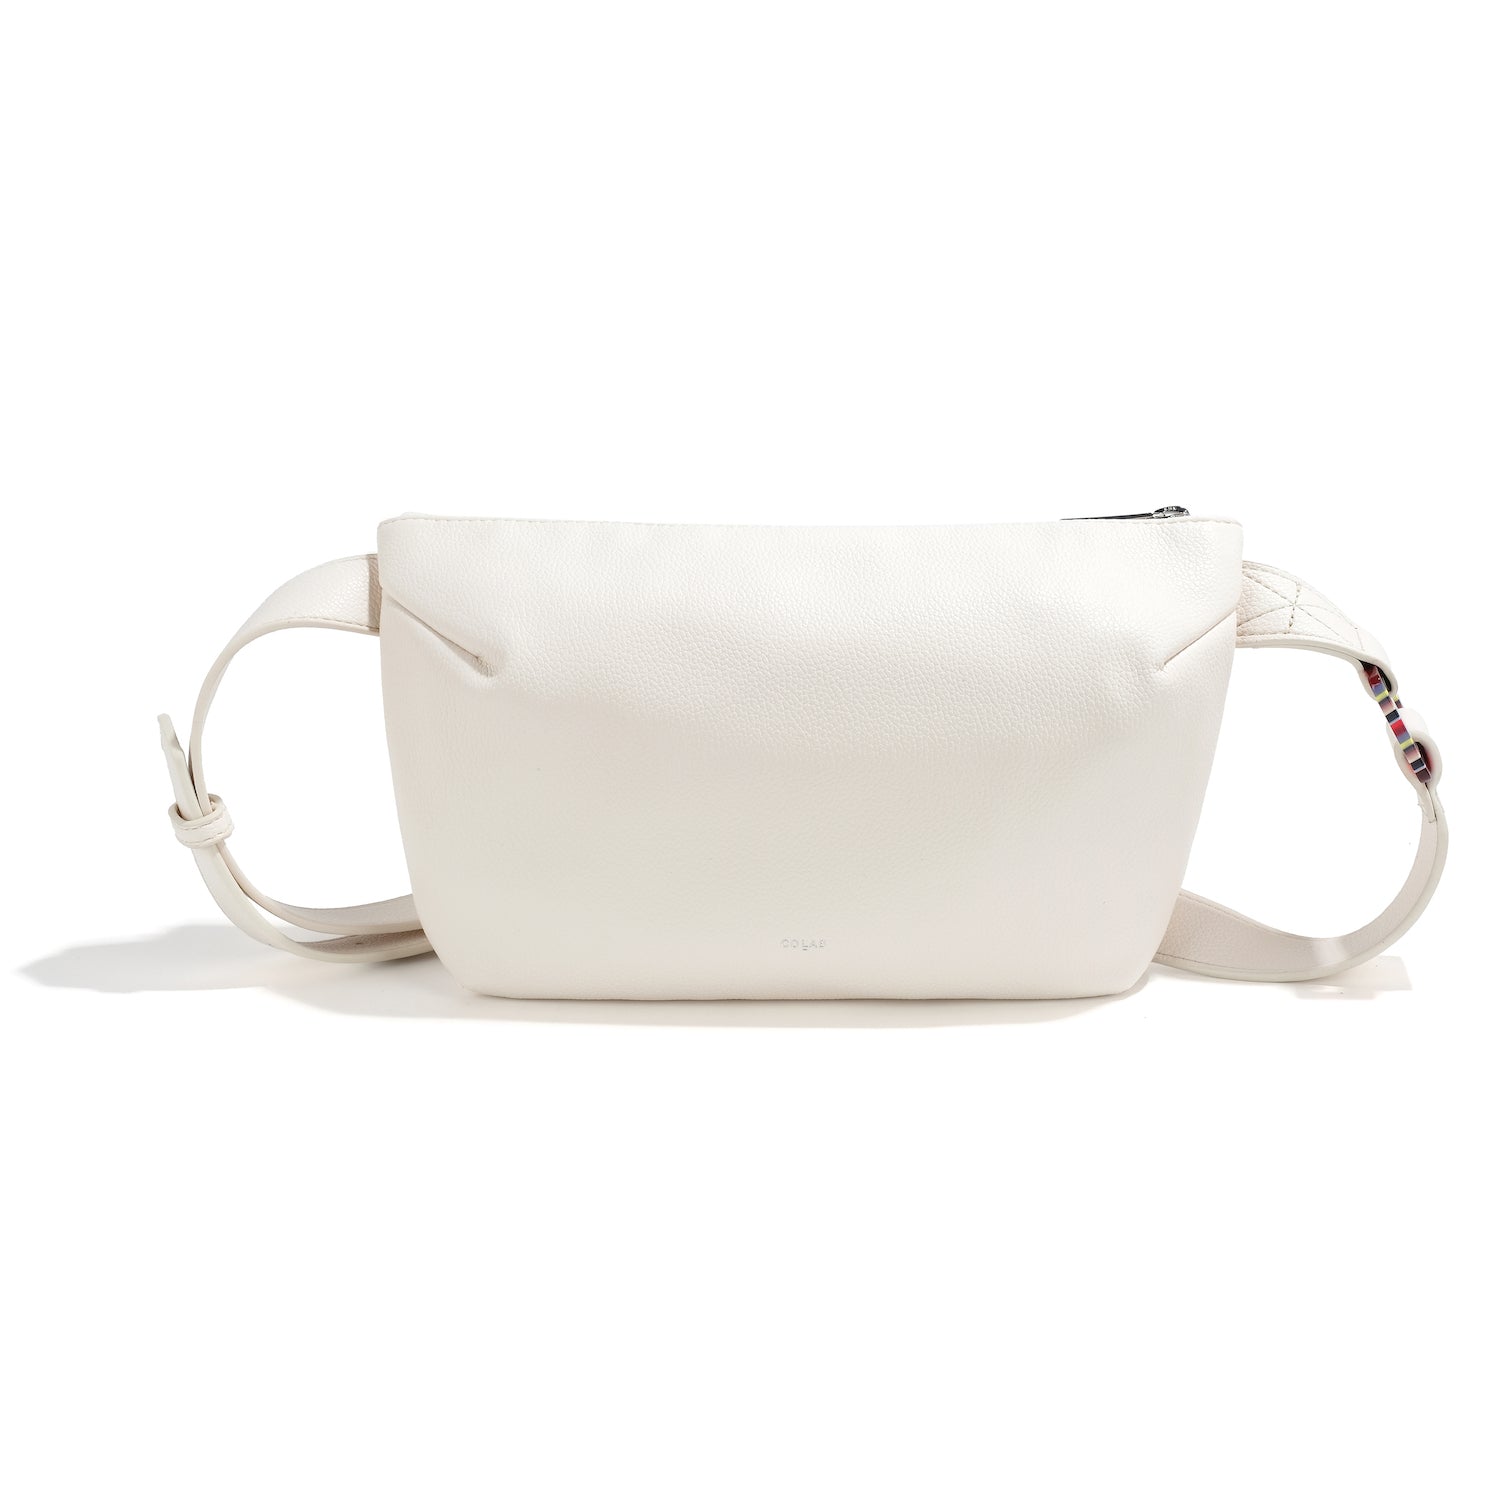 co-lab Francis Belt Bag - Cream Accessories - Other Accessories - Handbags & Wallets by co-lab | Grace the Boutique